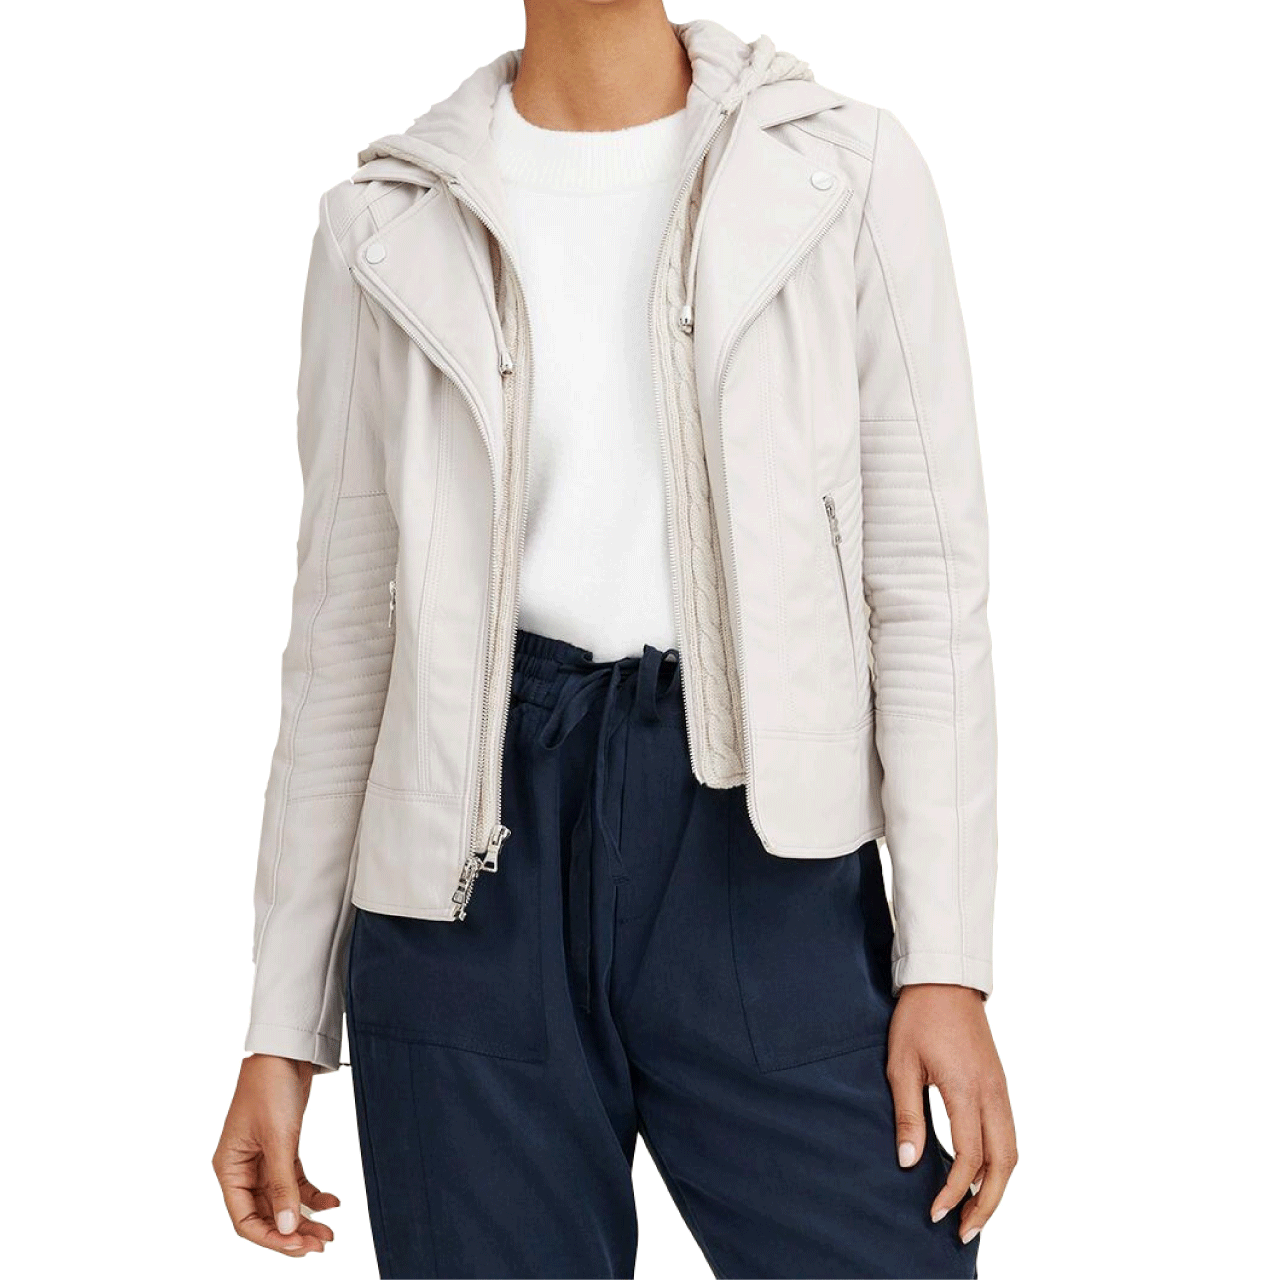 Women Stylish Hooded and Quilted White Sheepskin Leather Jacket